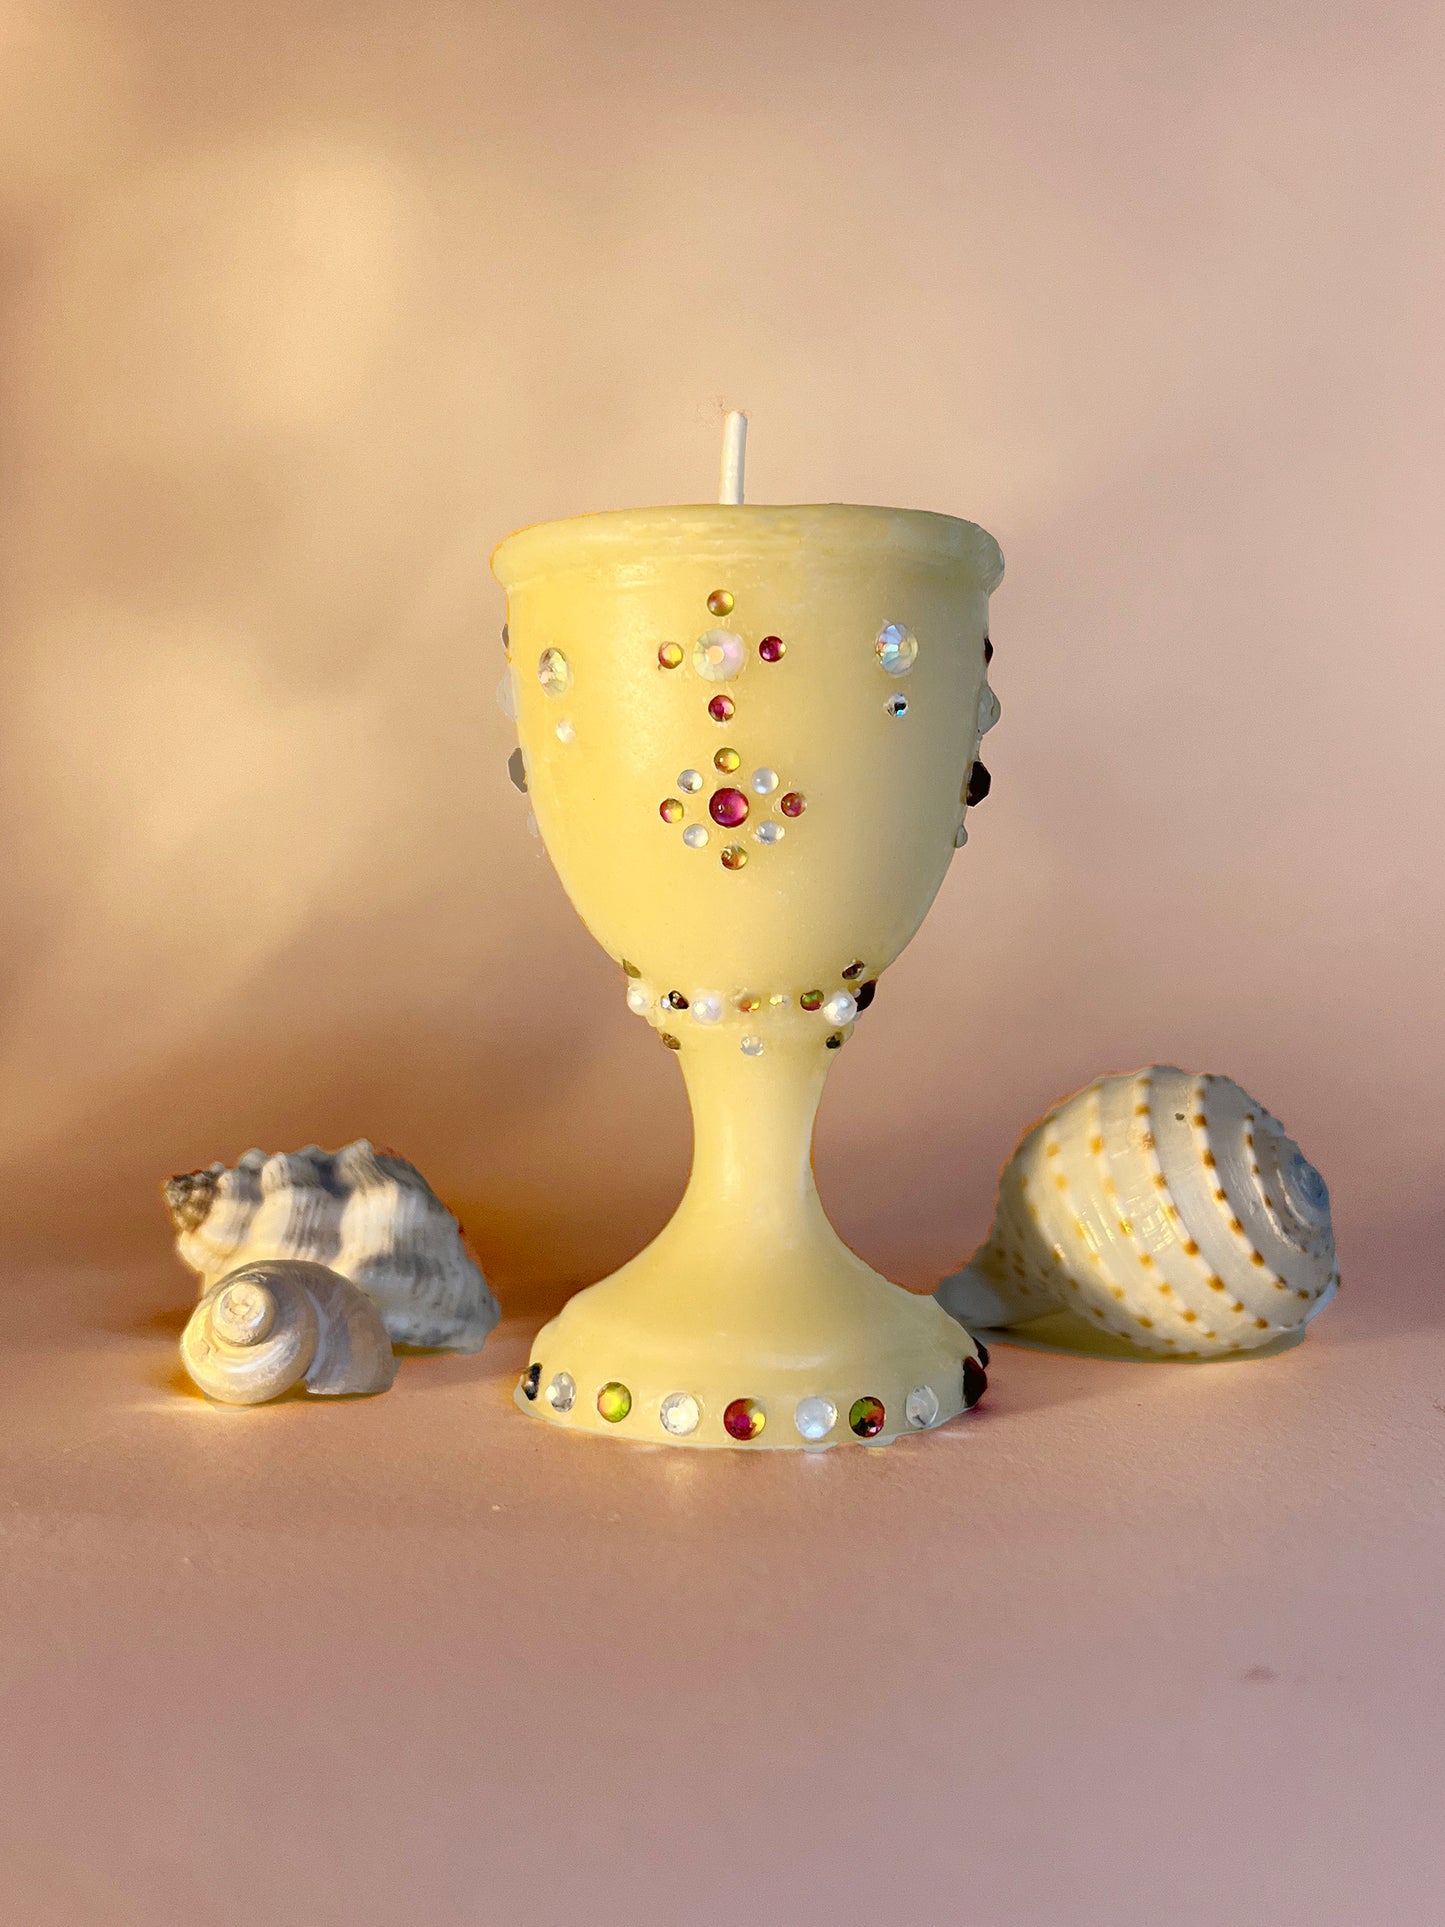 An adorned drinking vessel, shaped like a cup with multi-colored gem embellishments. Hand-poured and made from 100% beeswax. Small-batch and a perfect gift for someone looking for an eco-friendly and artisanal candle. 